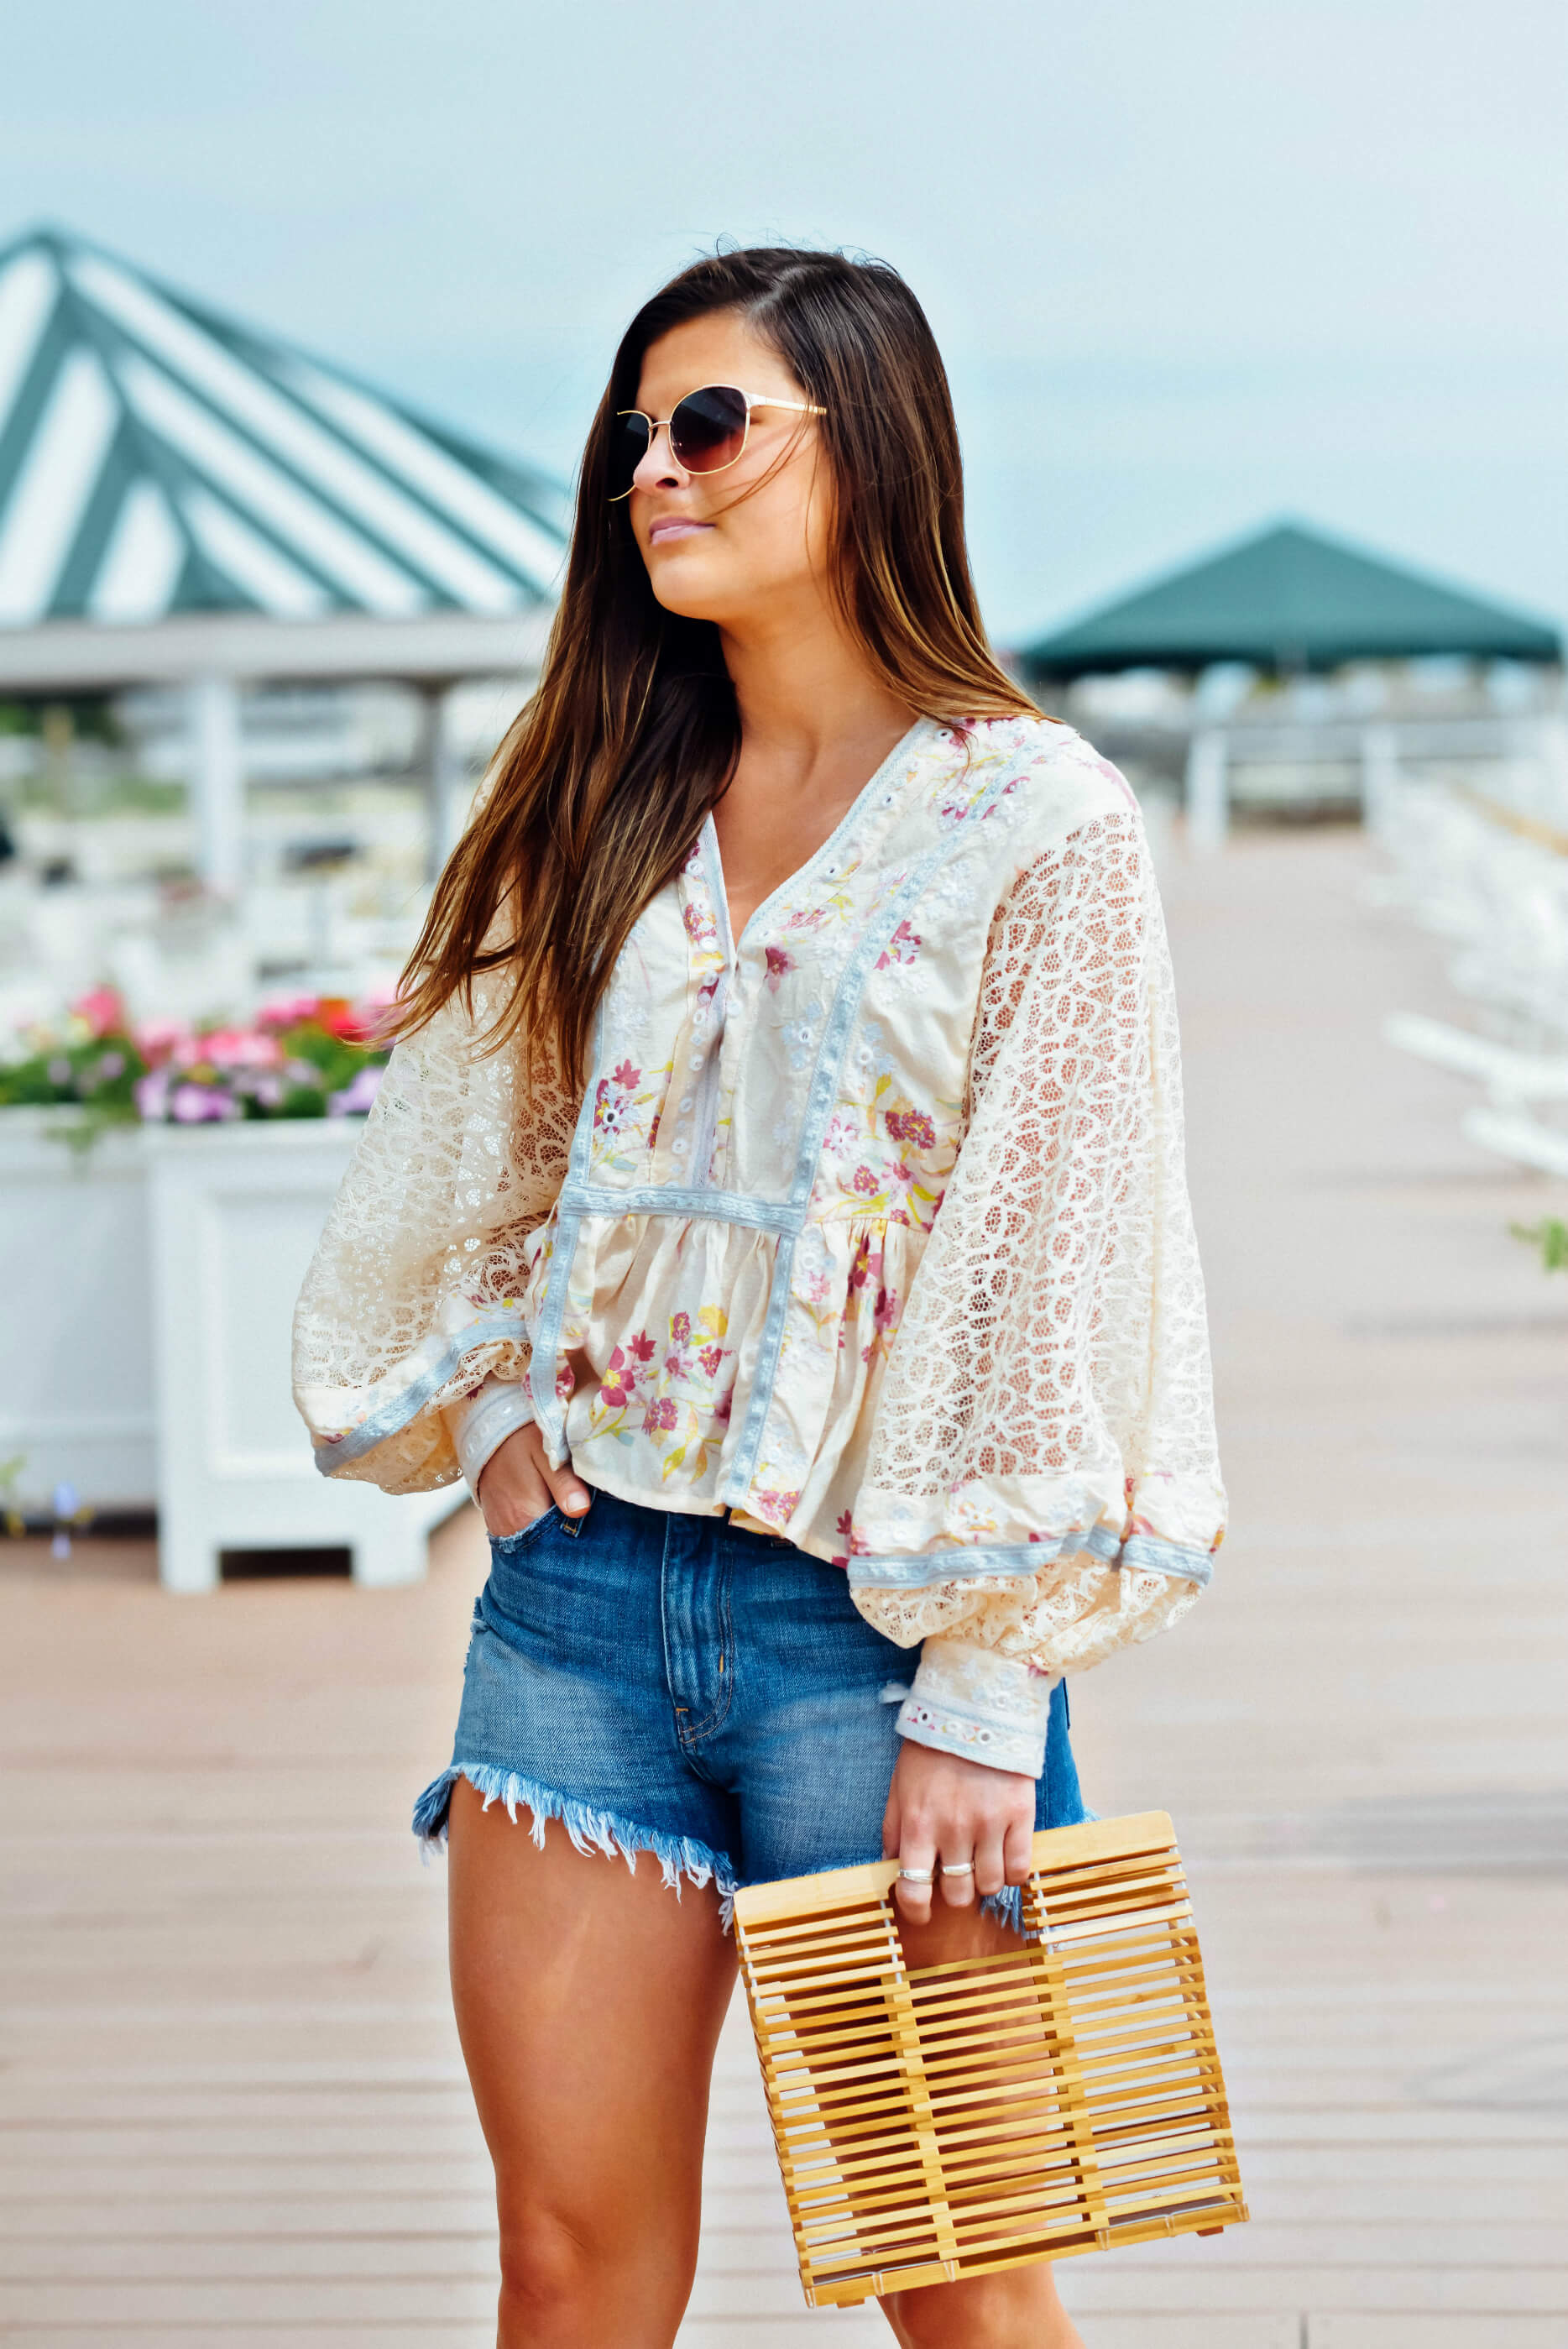 Free People Let's Boogie Lace Top, Flying Monkey Denim Shorts, Tilden of To Be Bright